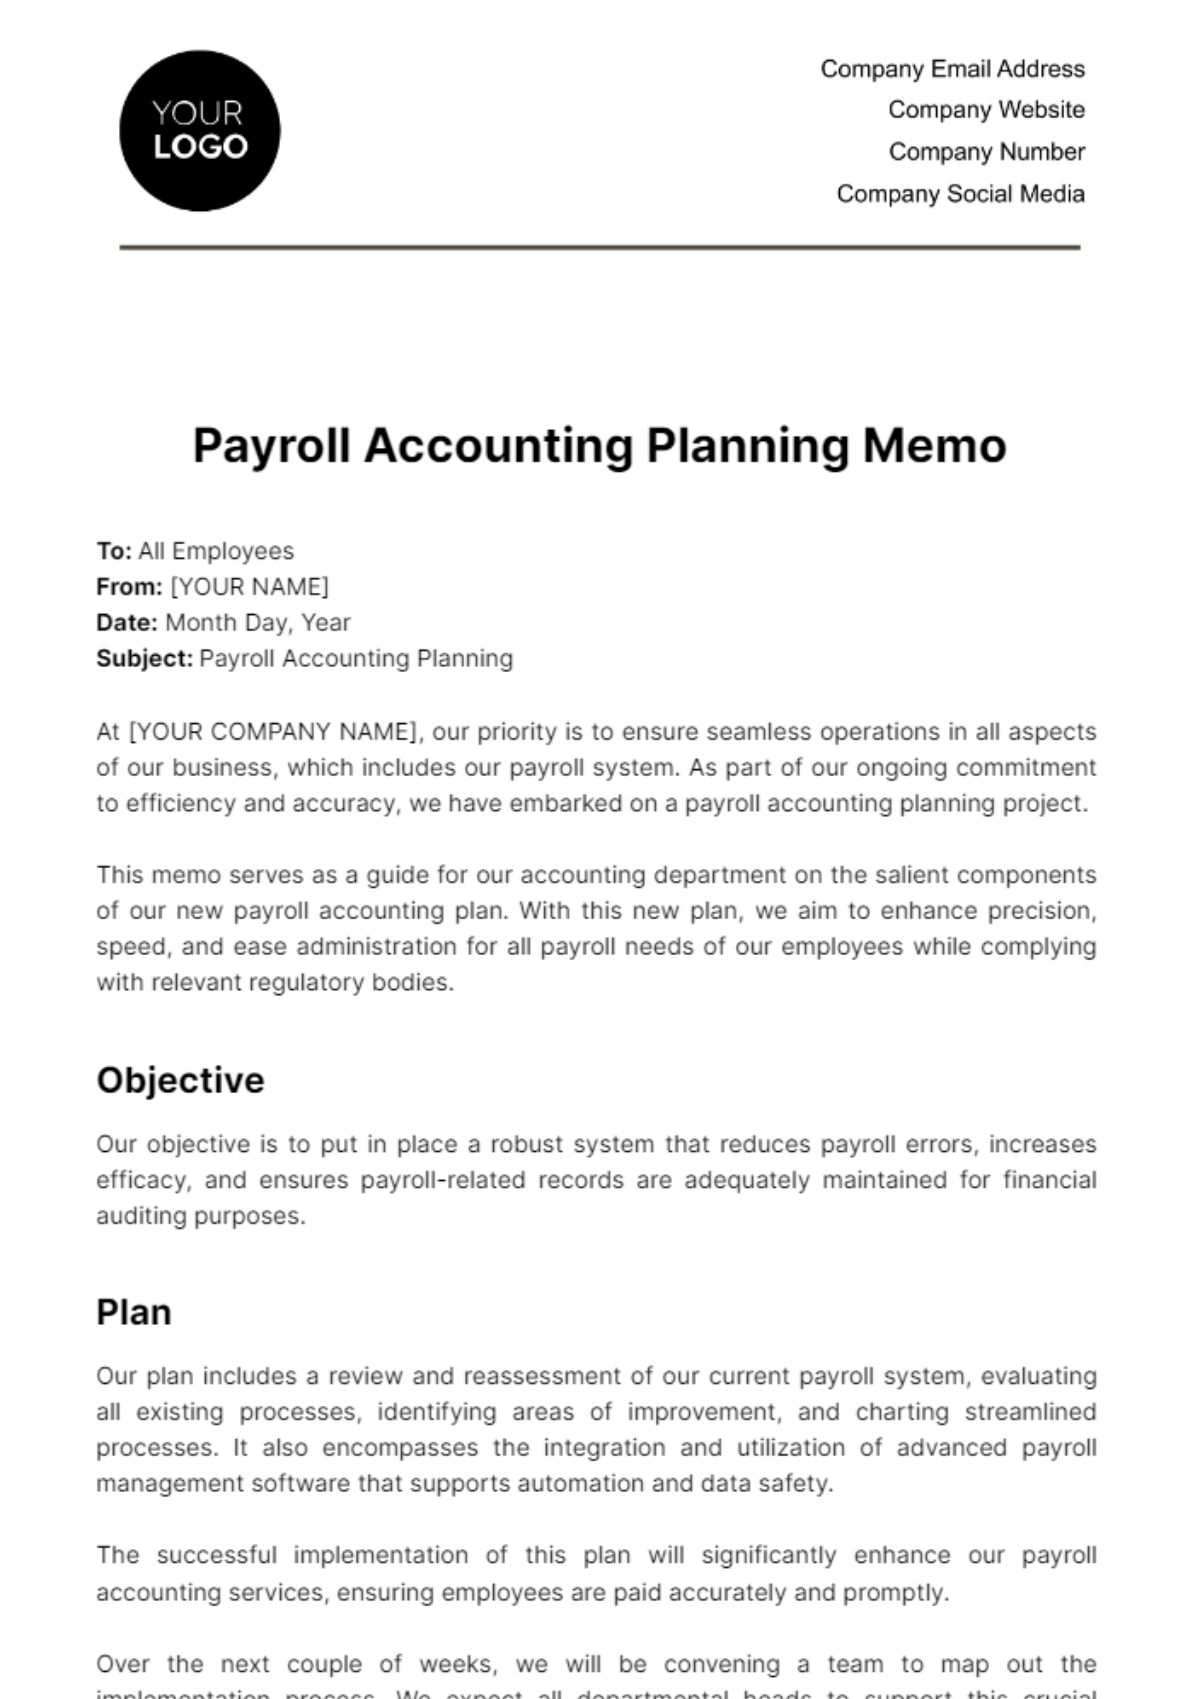 Payroll Accounting Planning Memo Template